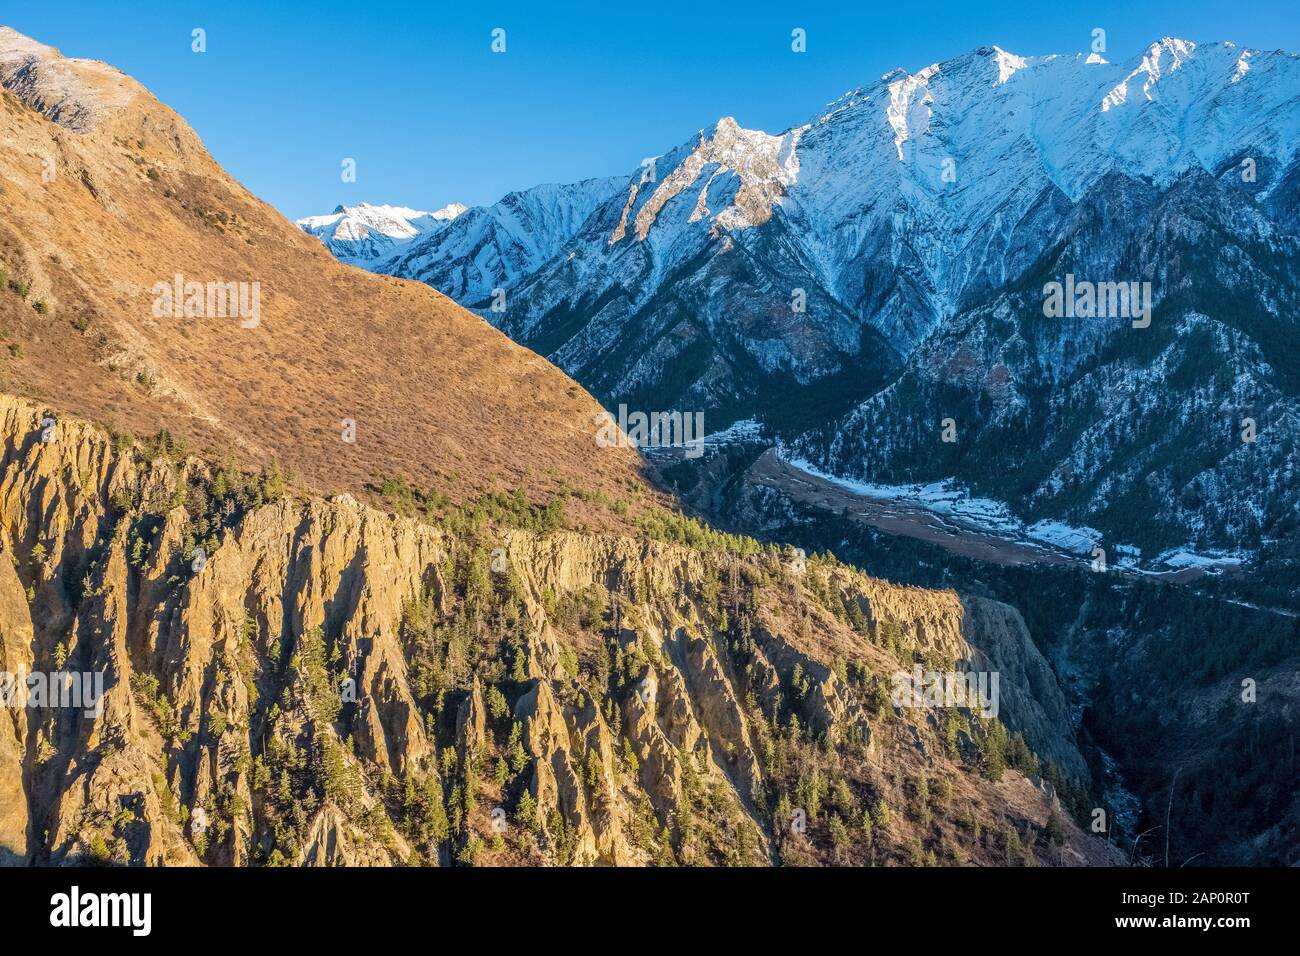 Mountain scenery on the Lower Dolpo trek in the Nepal Himalayas Stock Photo